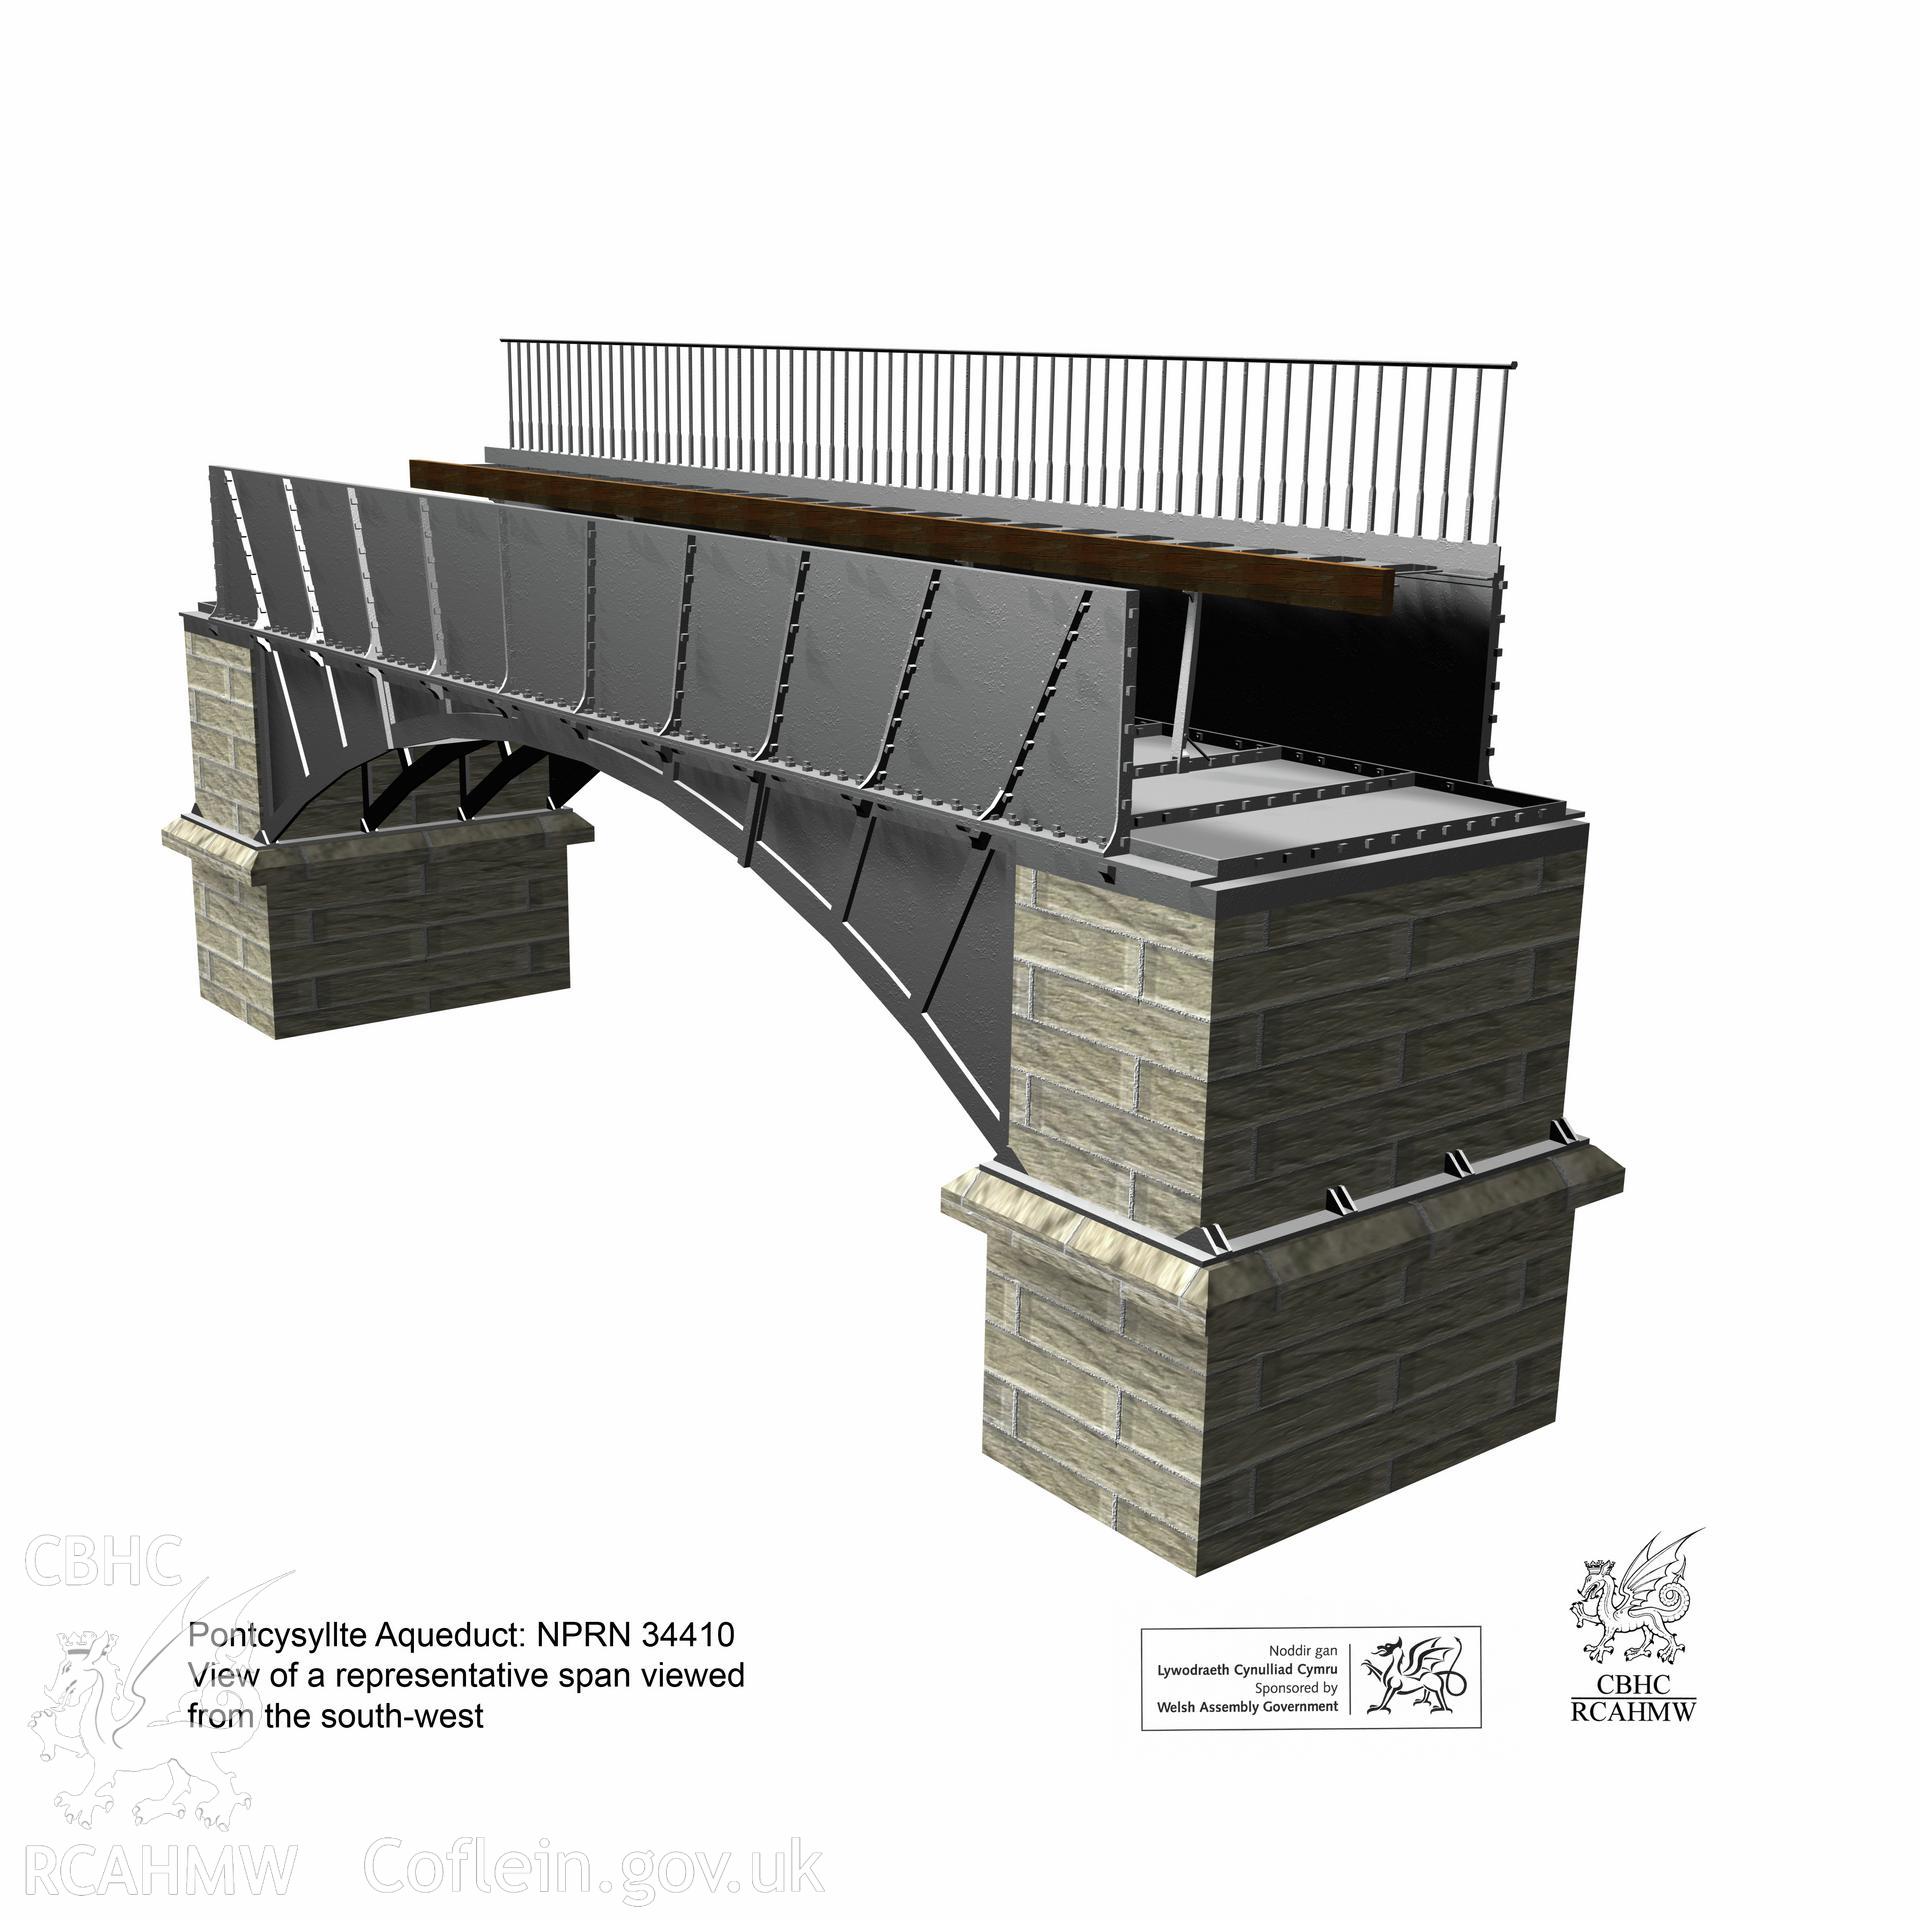 Still from a digital 3D model showing a representative span of the Pontcysyllte Aqueduct viewed from the south-west, from an RCAHMW survey of Pontcysyllte Aqueduct, carried out by Susan Fielding, 24/05/2006.